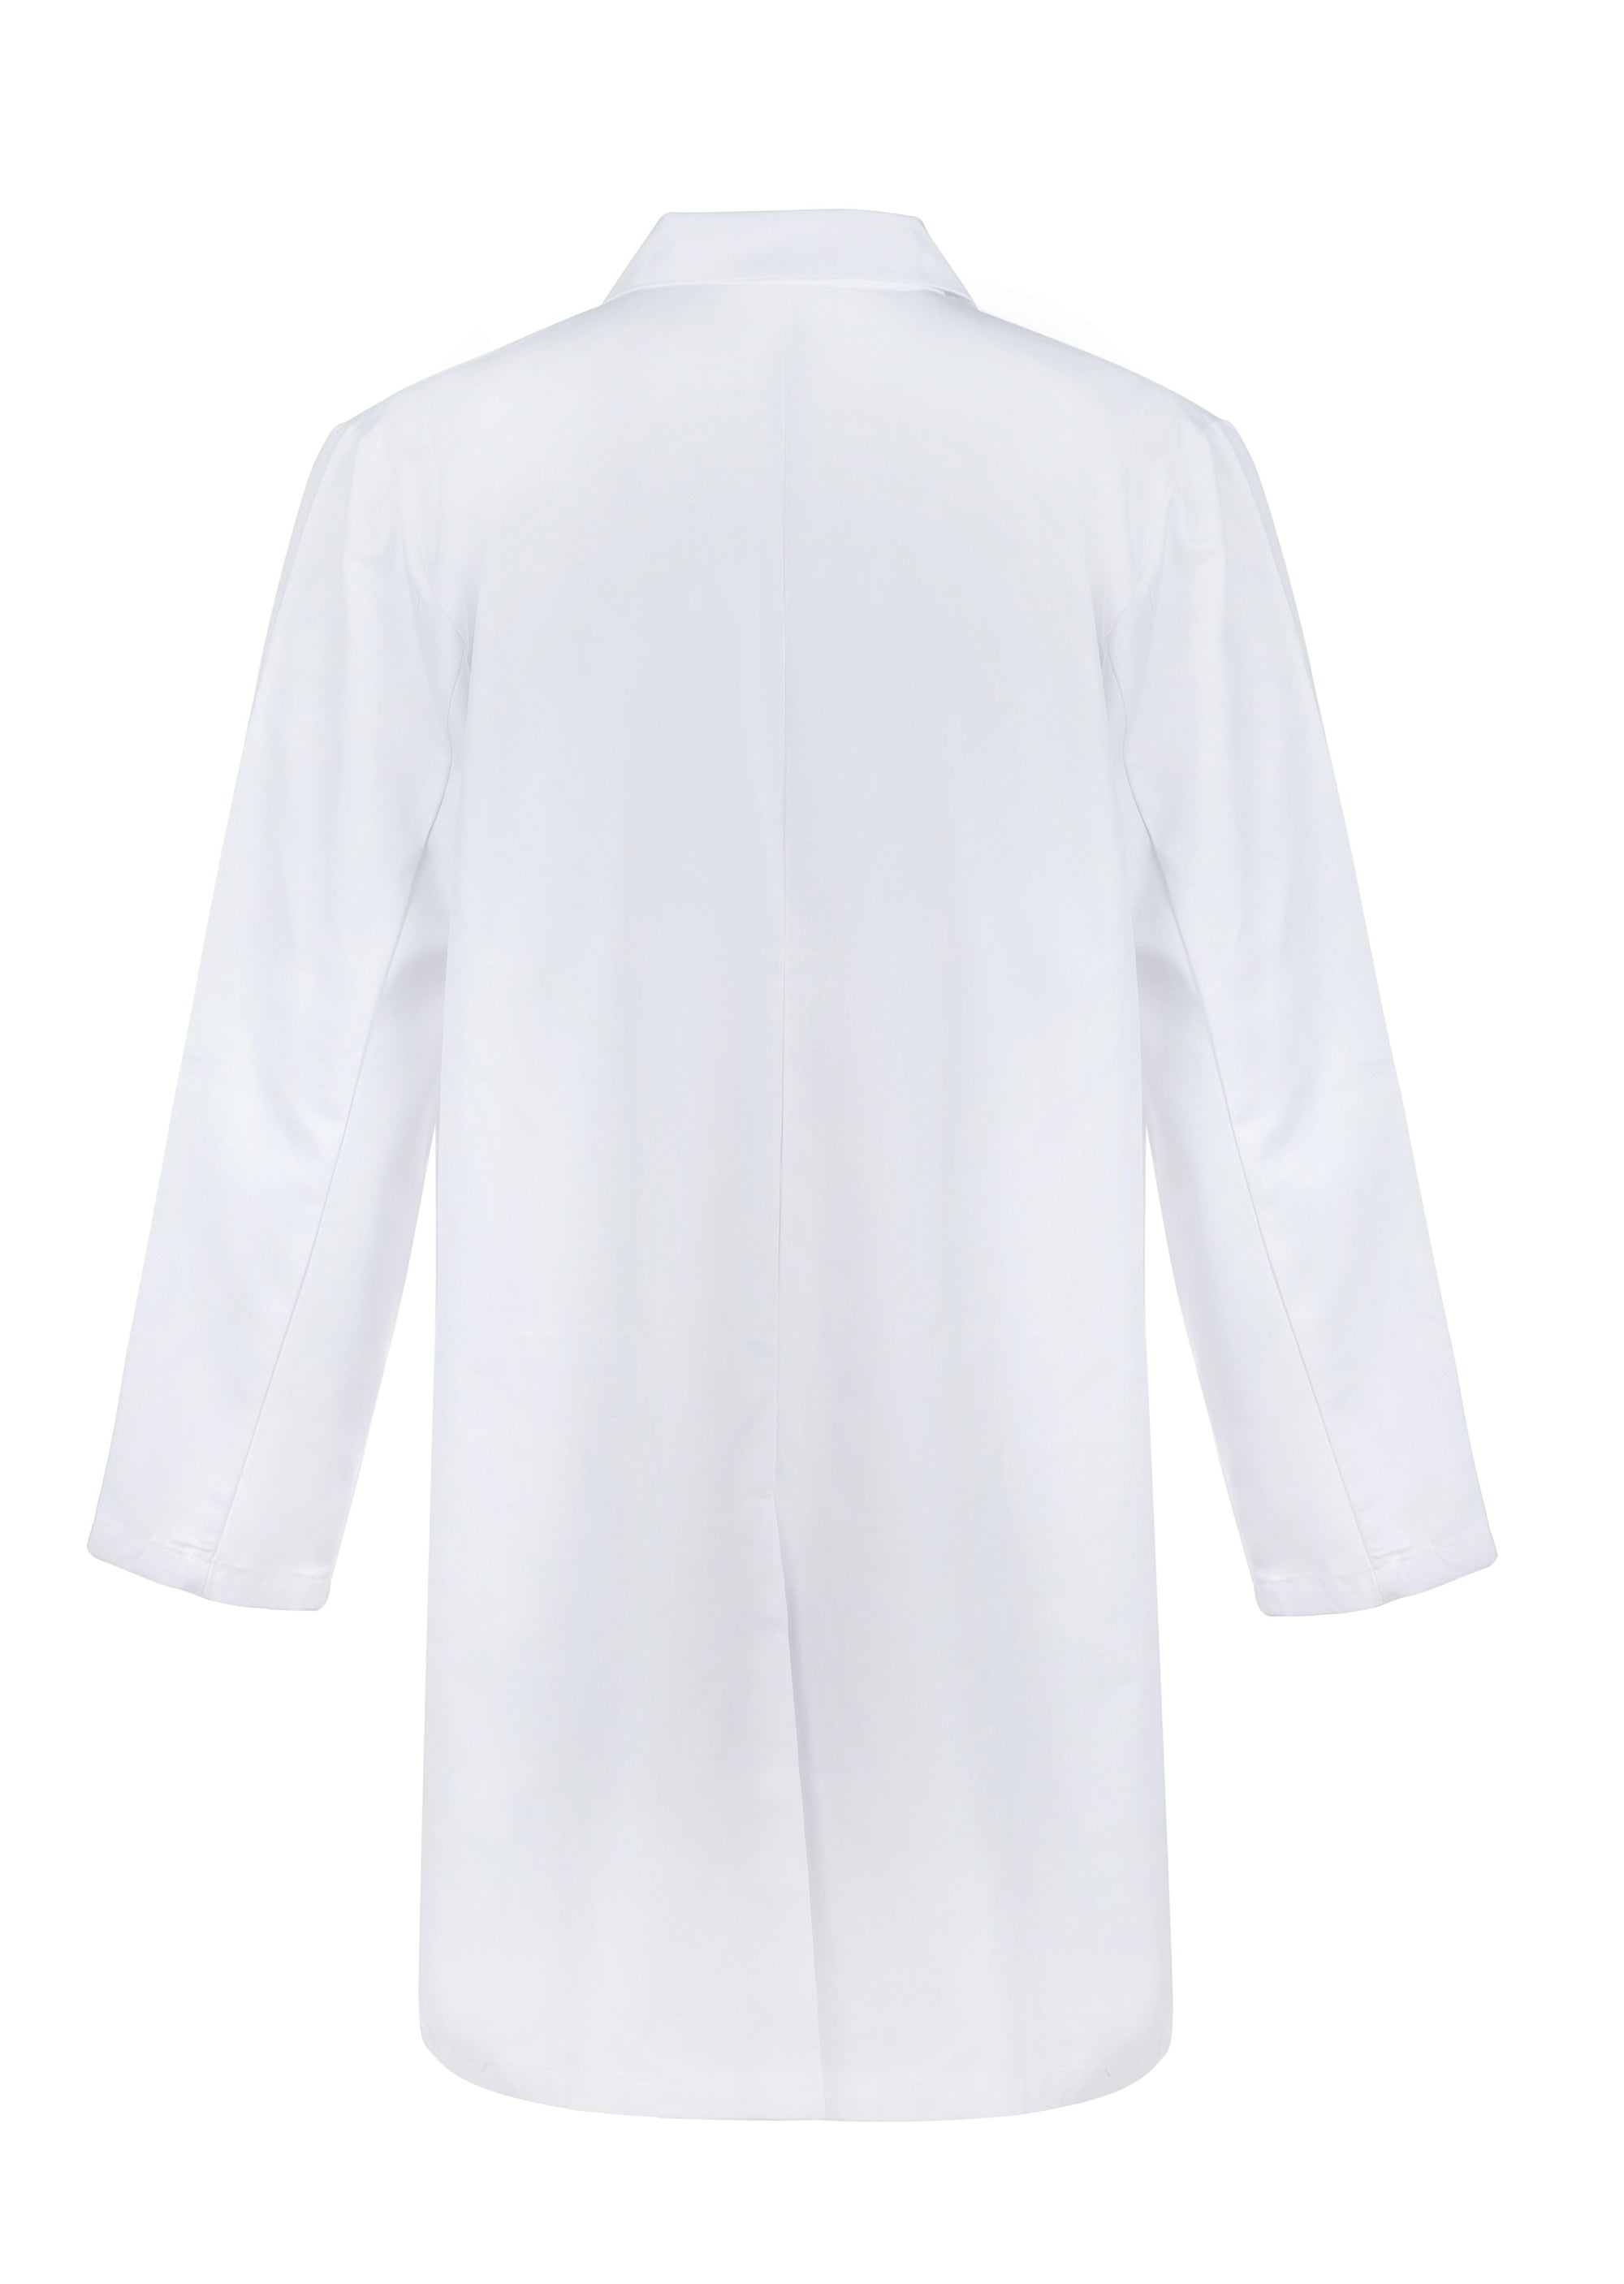 WorkCraft Mens White Dustcoat with Pockets ls 220g 2xl